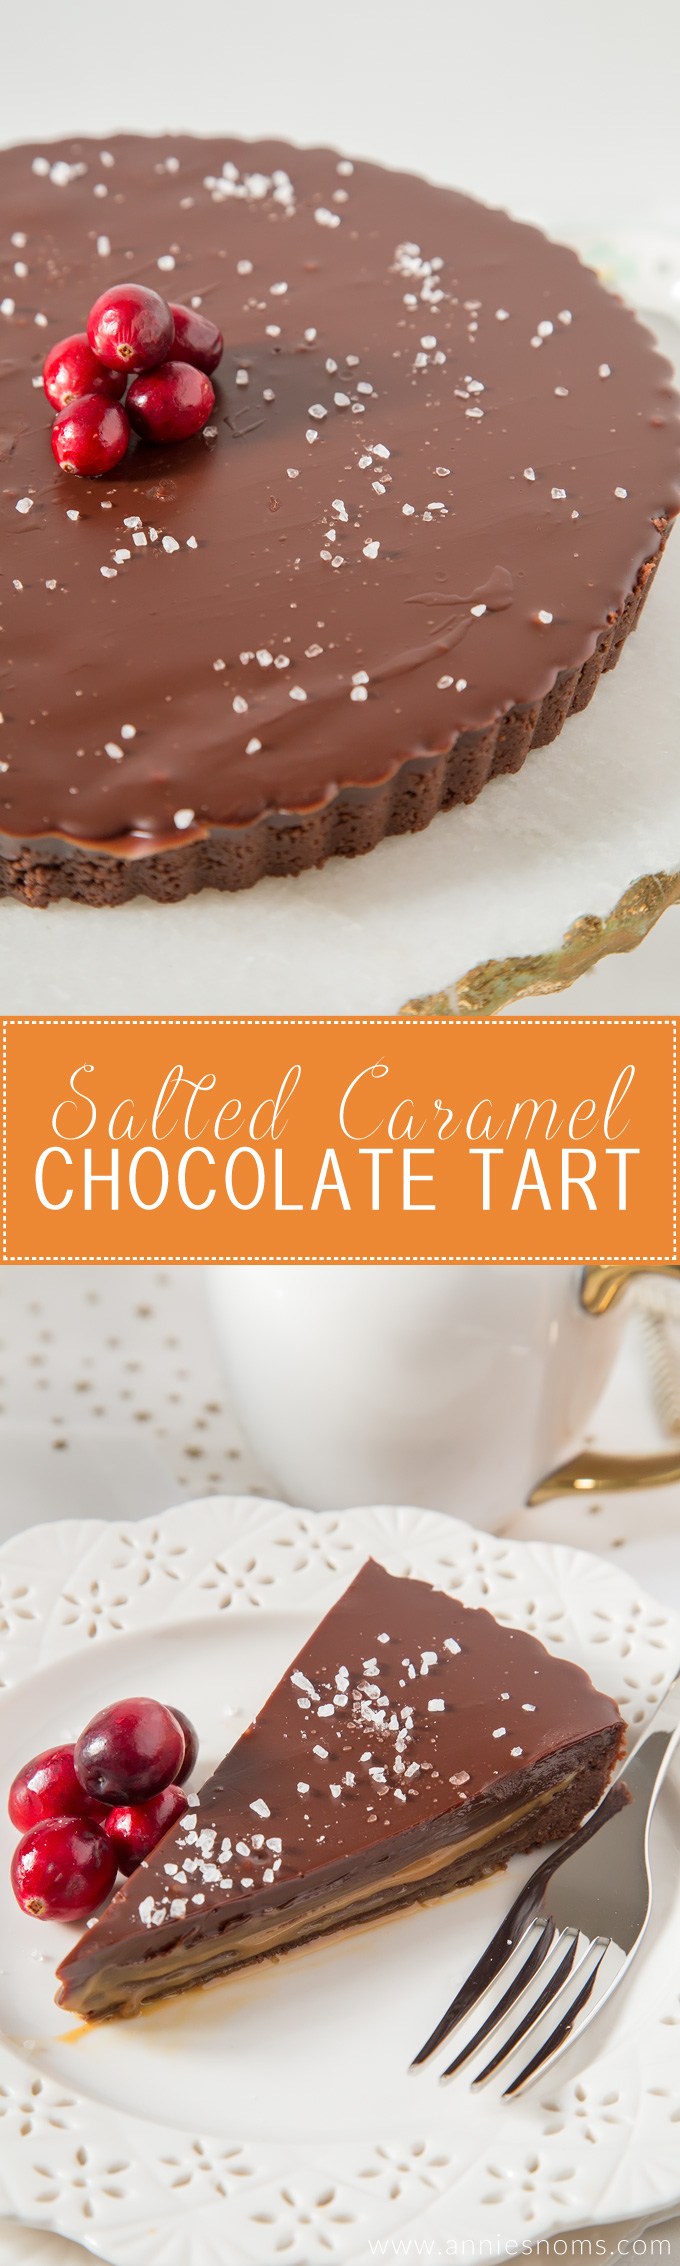 This no-bake Salted Caramel Chocolate Tart is rich, decadent and ridiculously easy to make! The sweet caramel cuts through the chocolate creating one heavenly dessert!